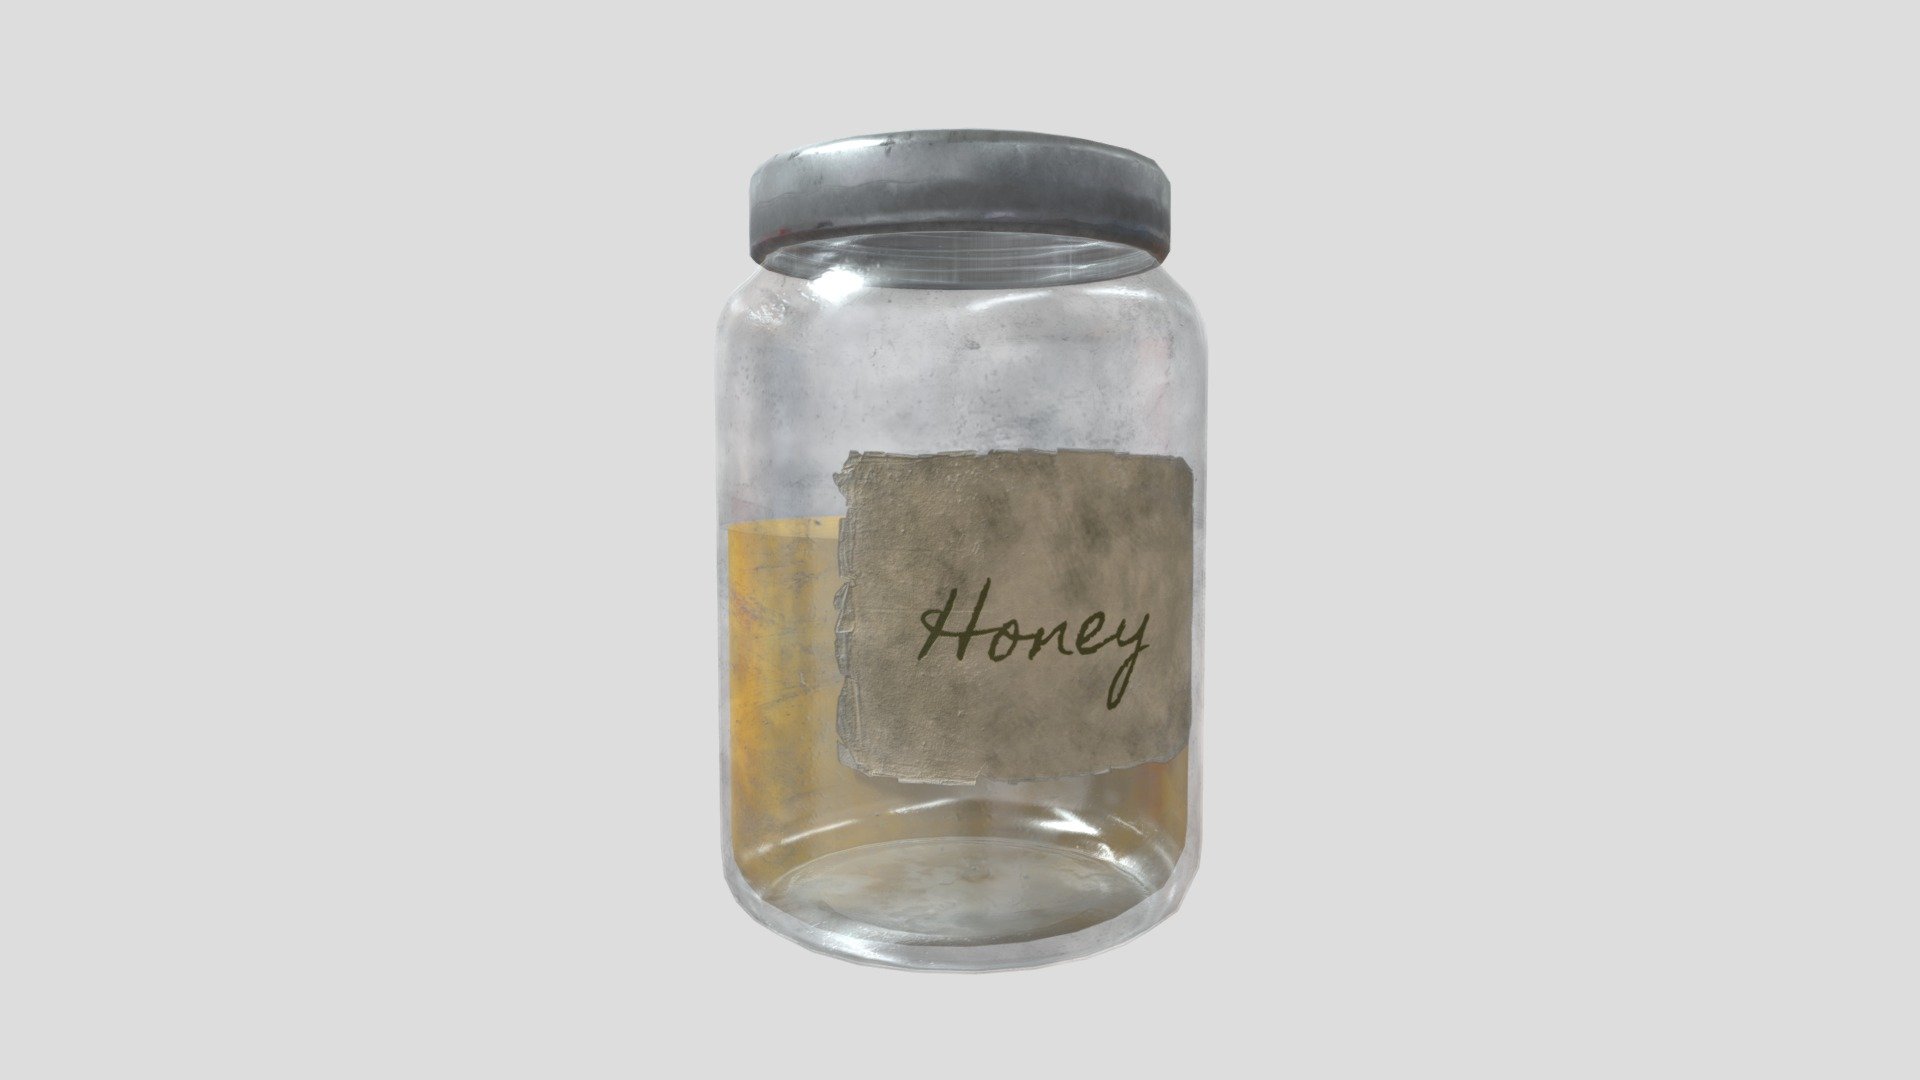 Textures 2048x2048

Model pieces

-Jar
-Honey
-Top
-Lable

Modelded in sperarate pieces so it could be animated 3d model